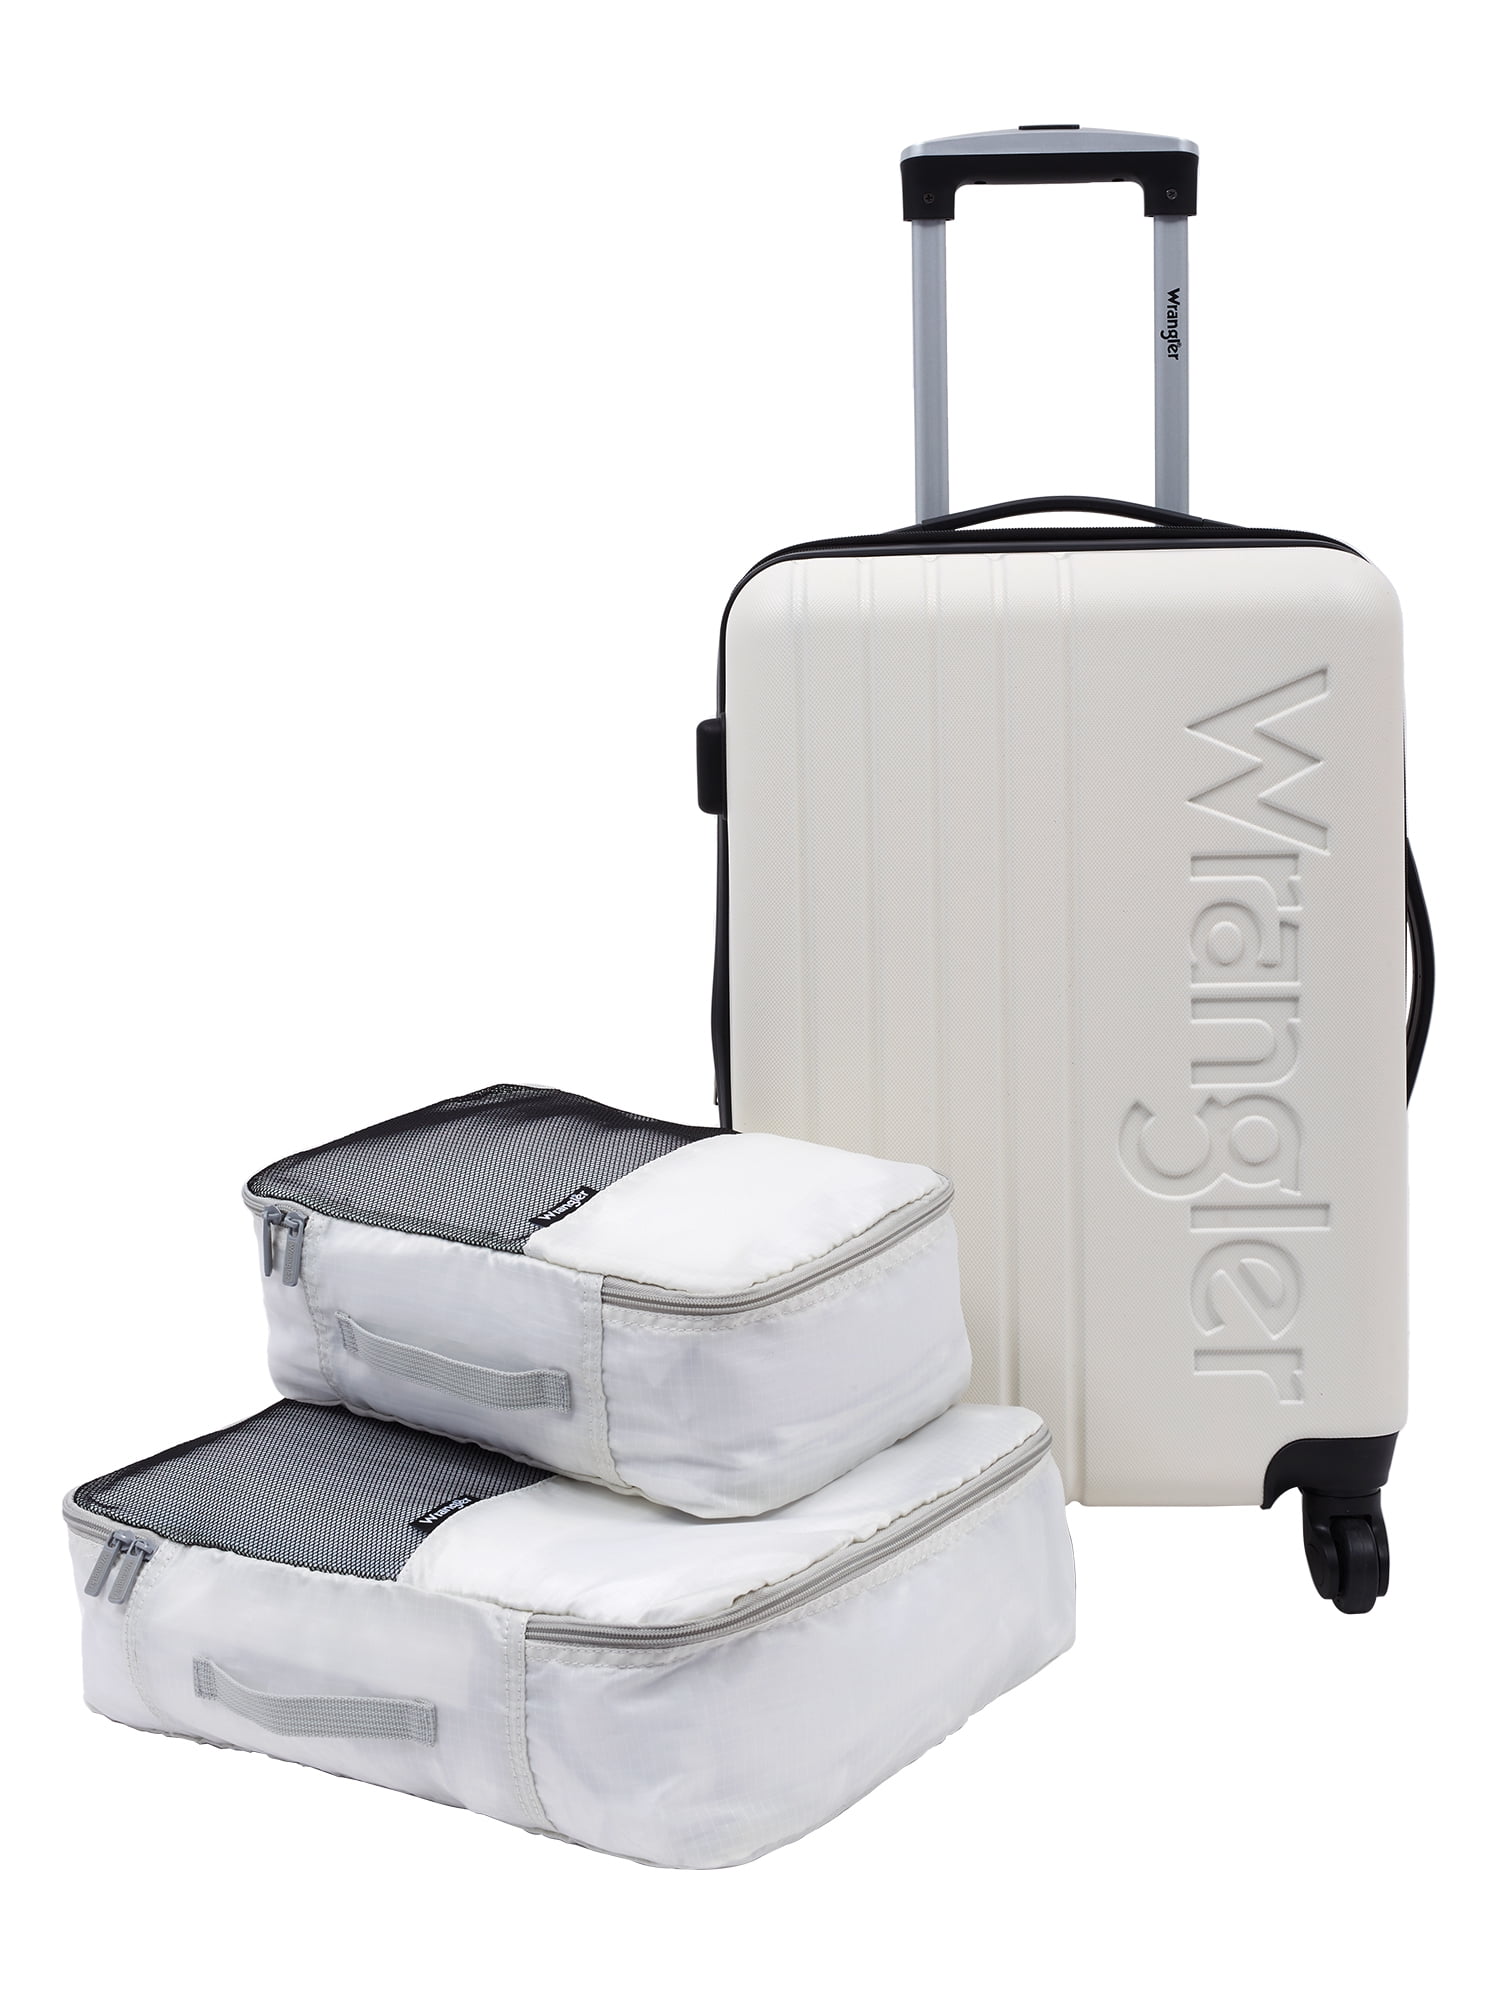 Affordable Travel Bags, Roller Bags & Weekend Bags - IKEA